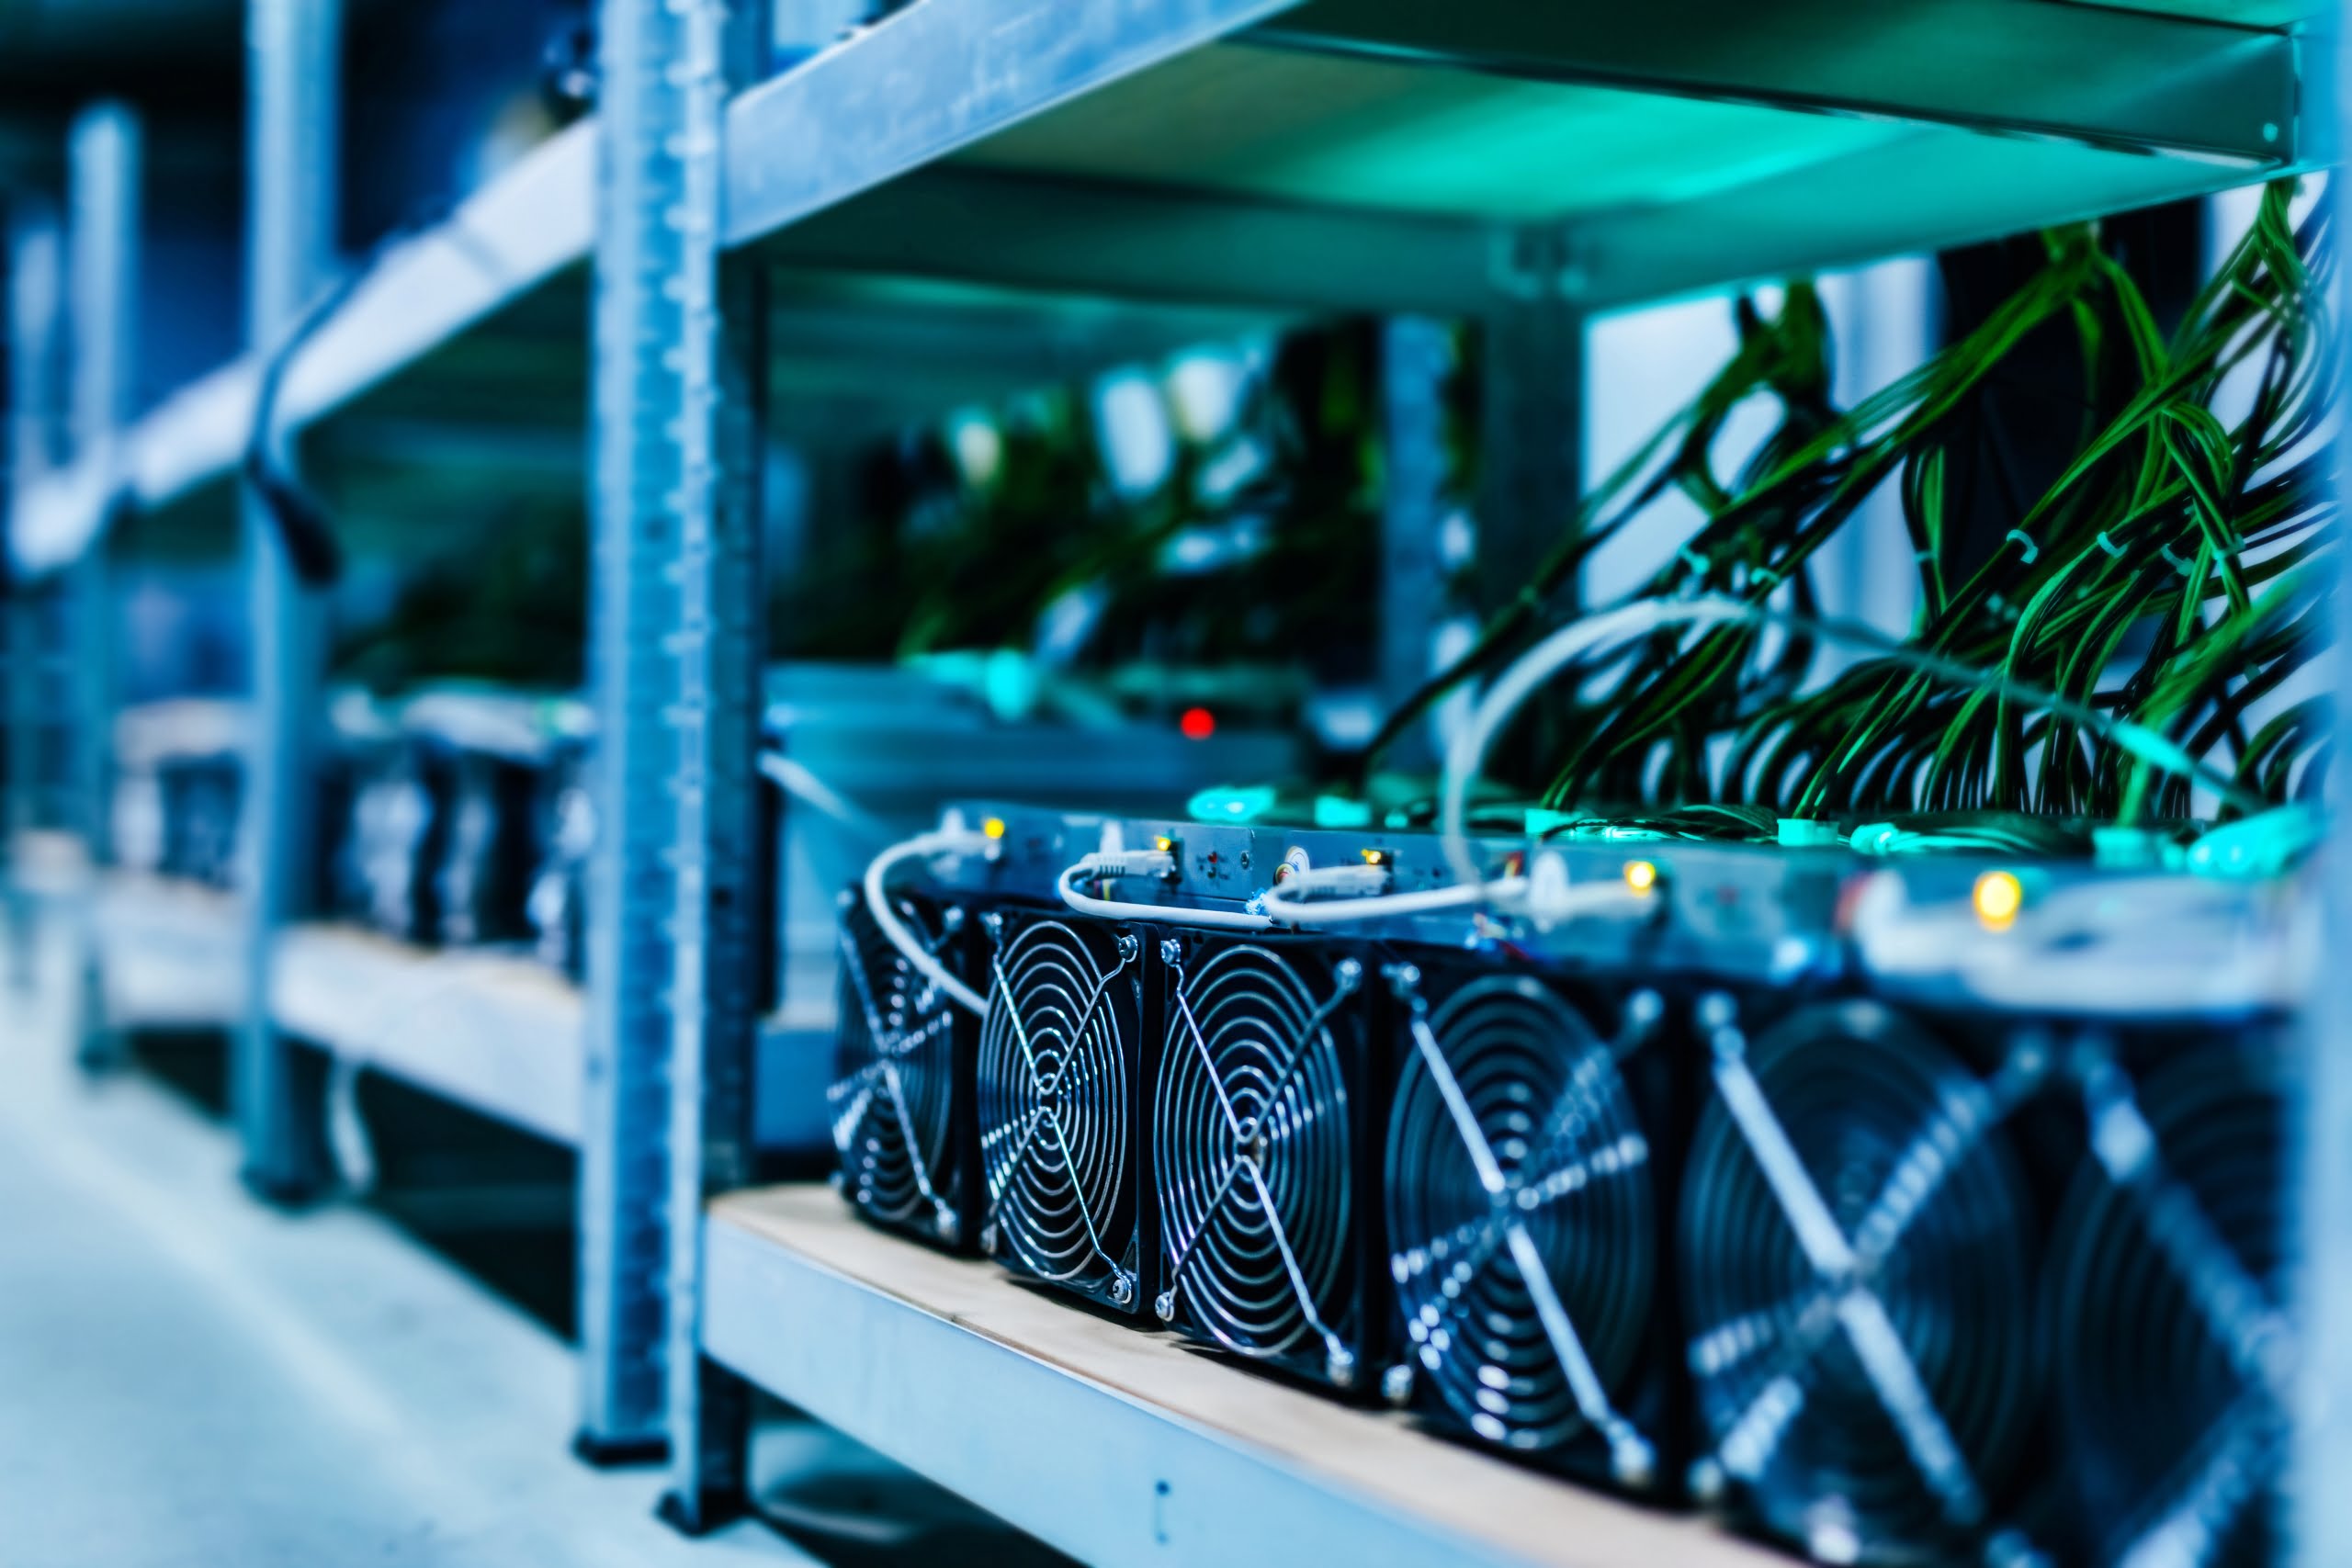 Chinese underground Bitcoin miners are still active: CCAF 7